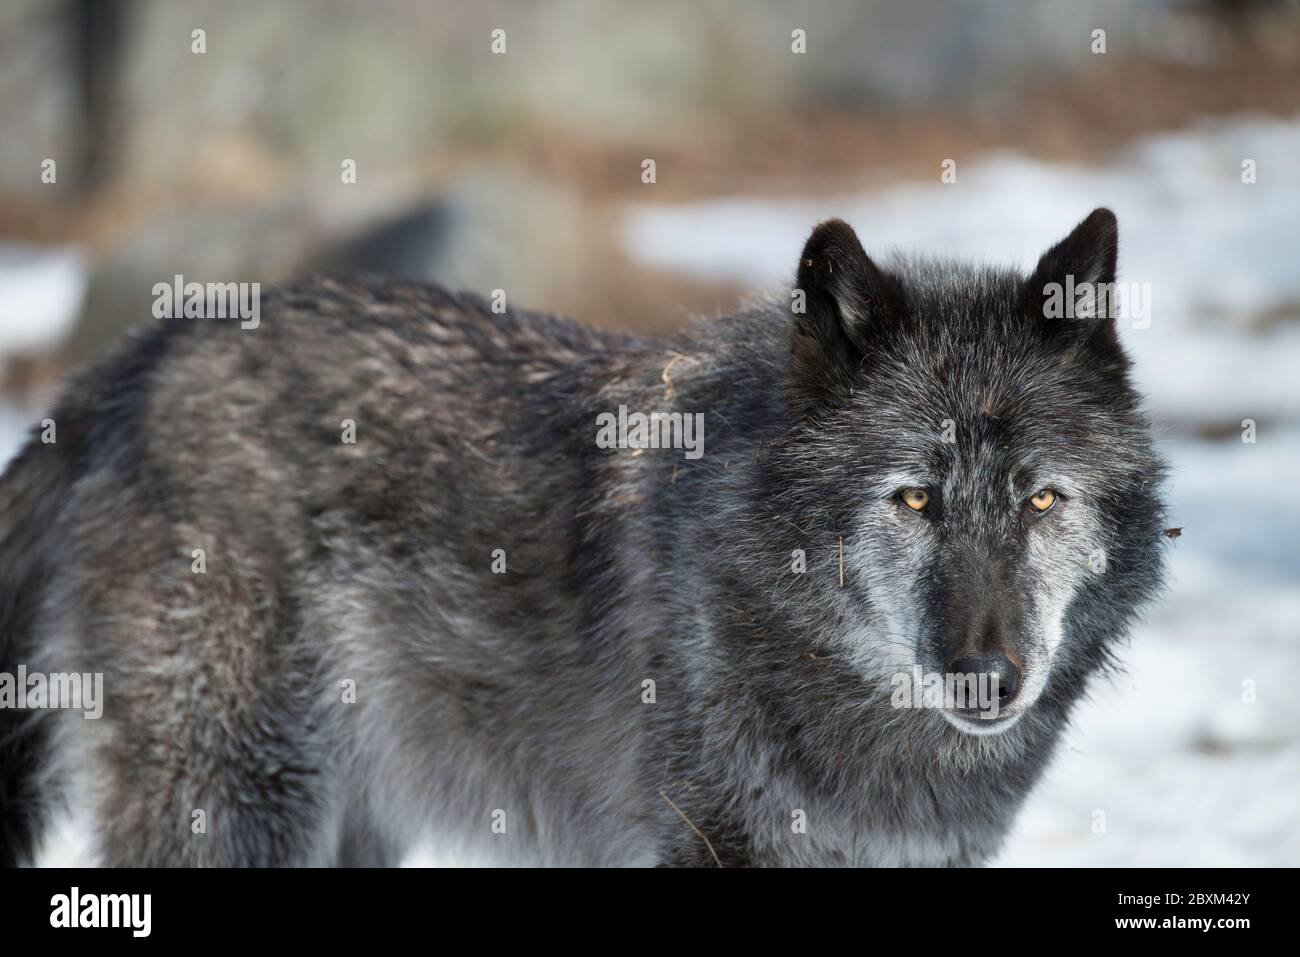 Black Timber Wolf (also known as a Gray or Grey wolf) in the snow Stock Photo